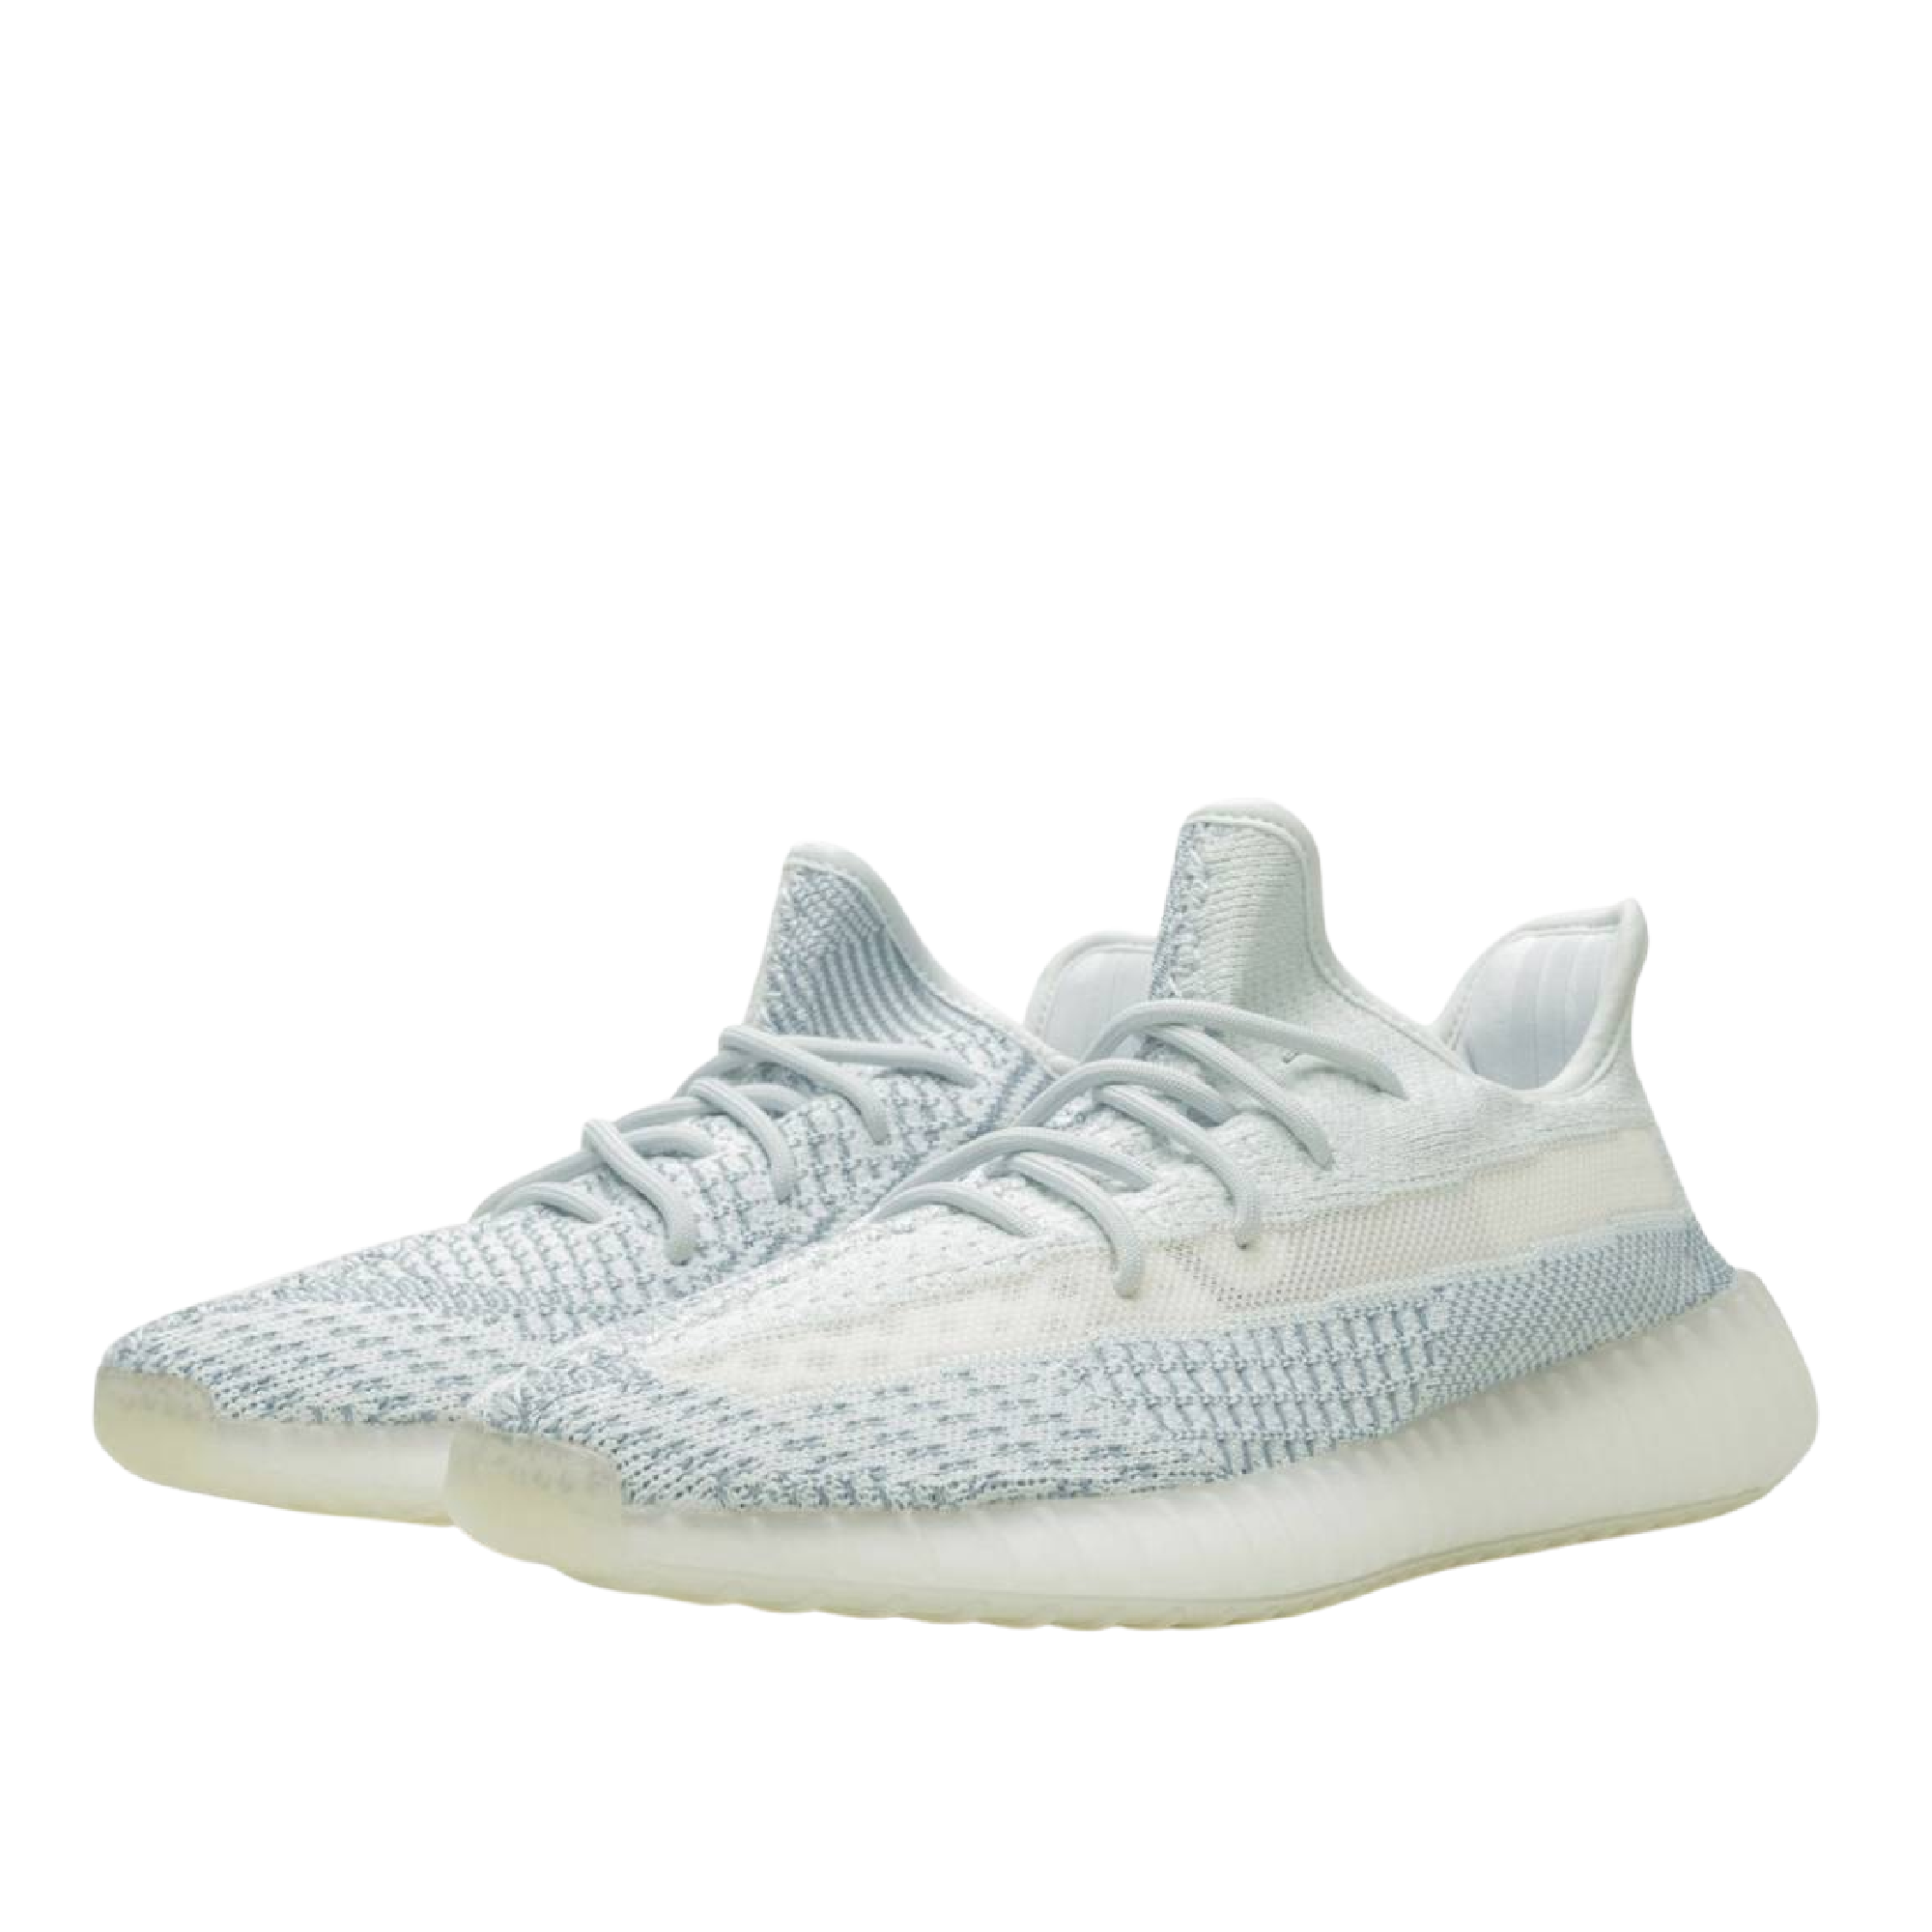 Adidas Yeezy Boost 350 V2 Static (Non-Reflective) – Sneaker Plug India